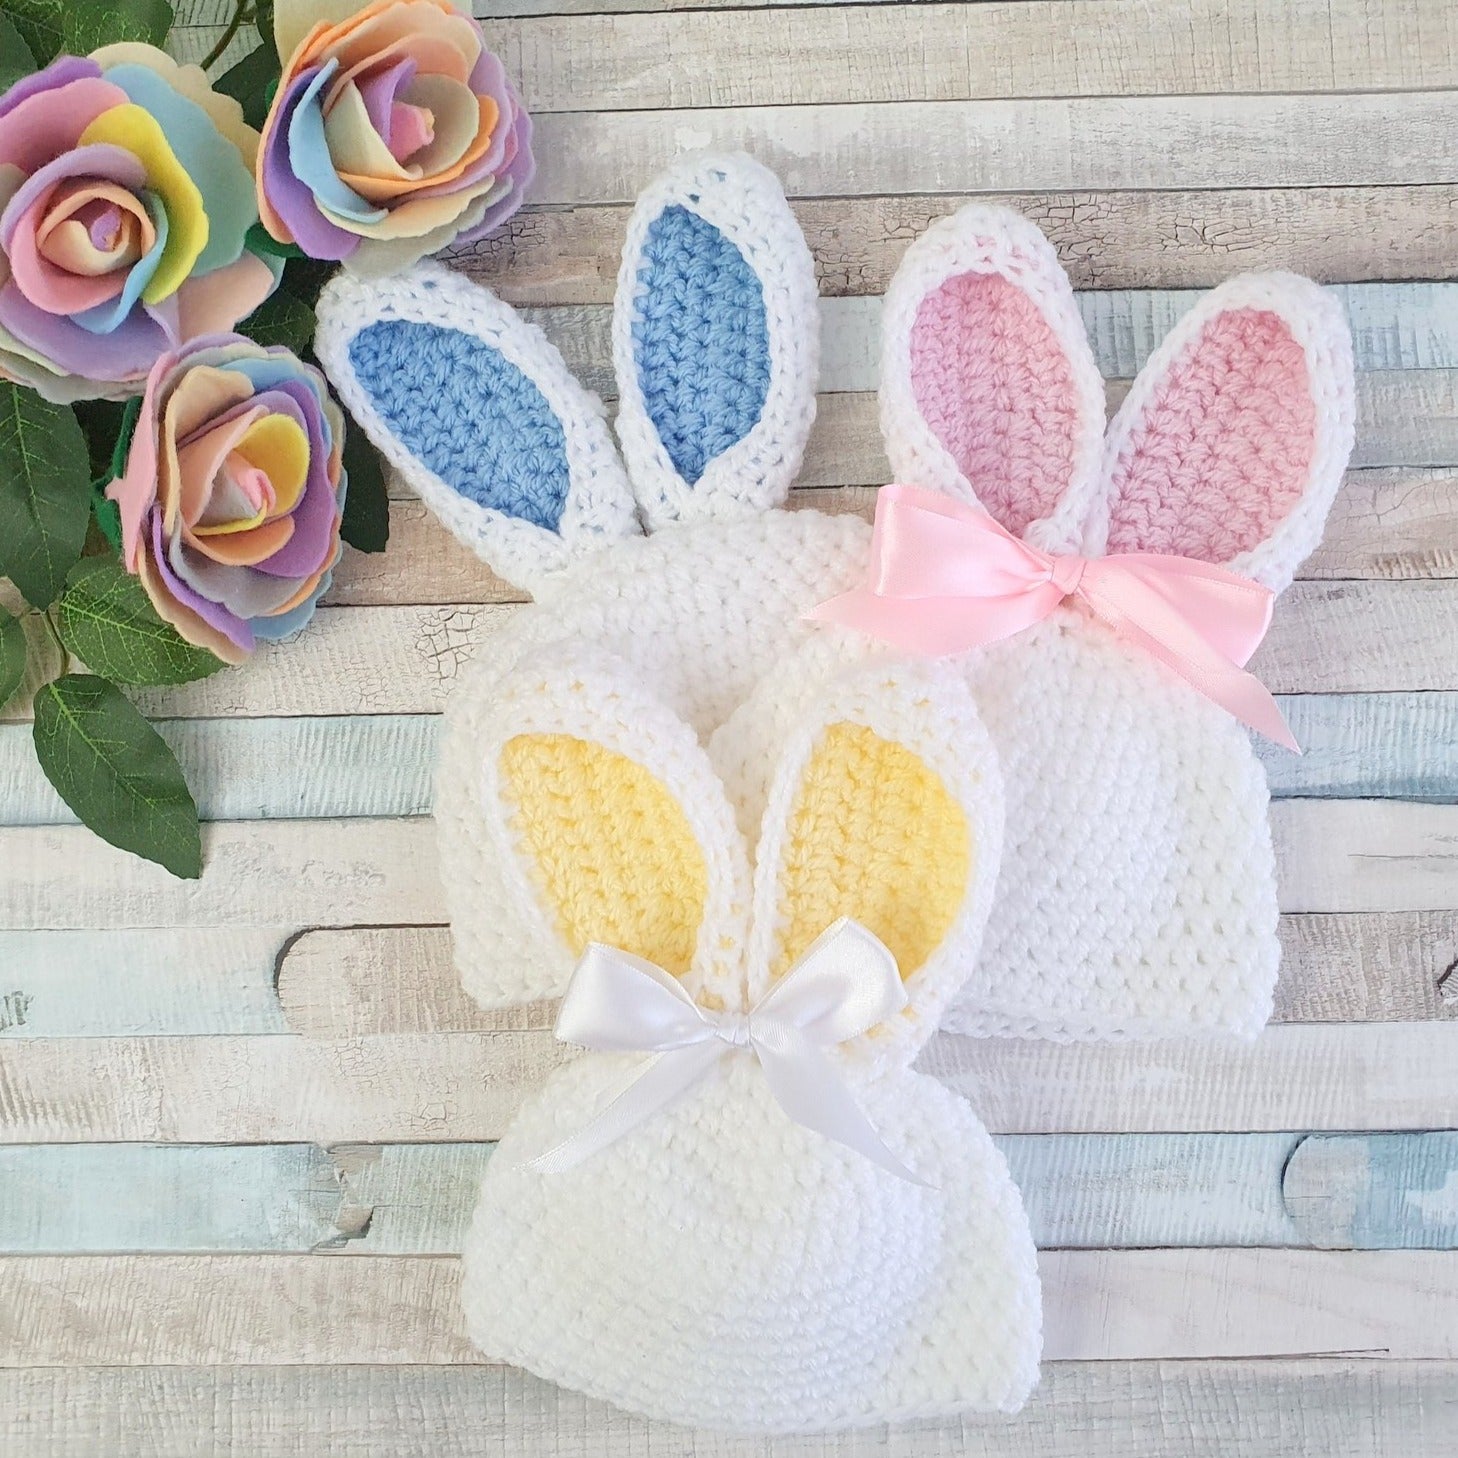 crochet baby bunny hat with stand up ears pink blue yellow